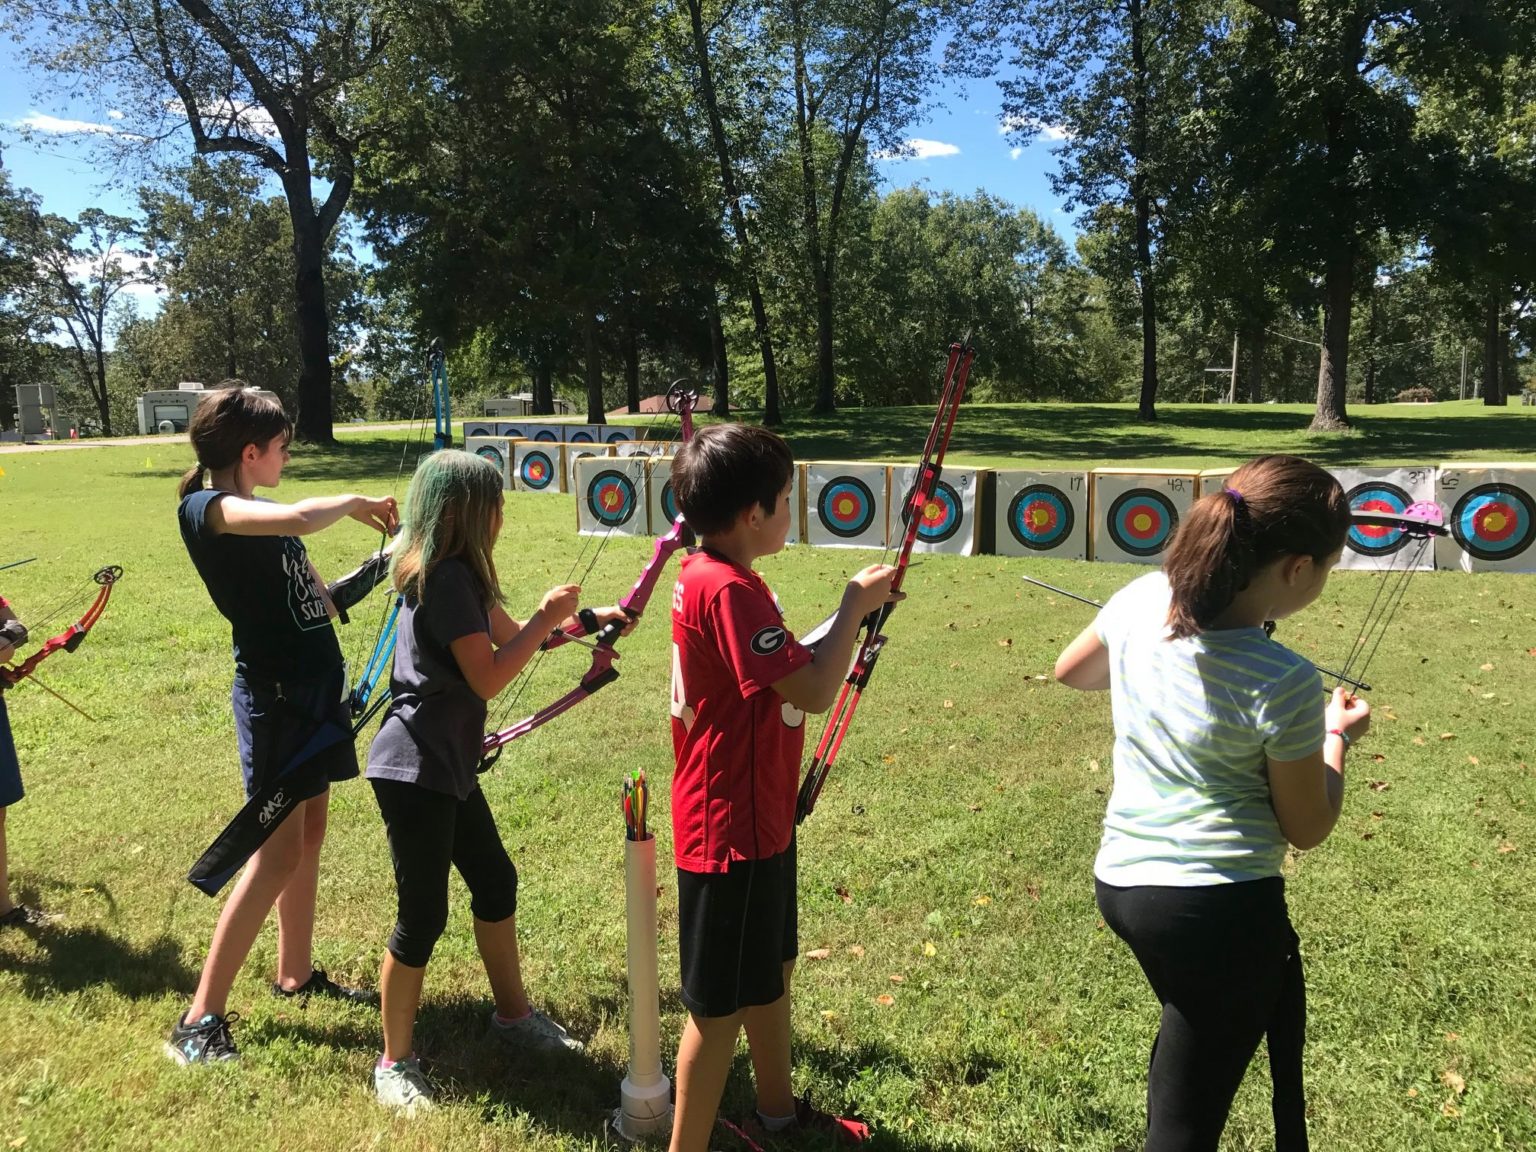 youth practicing archery outdoors